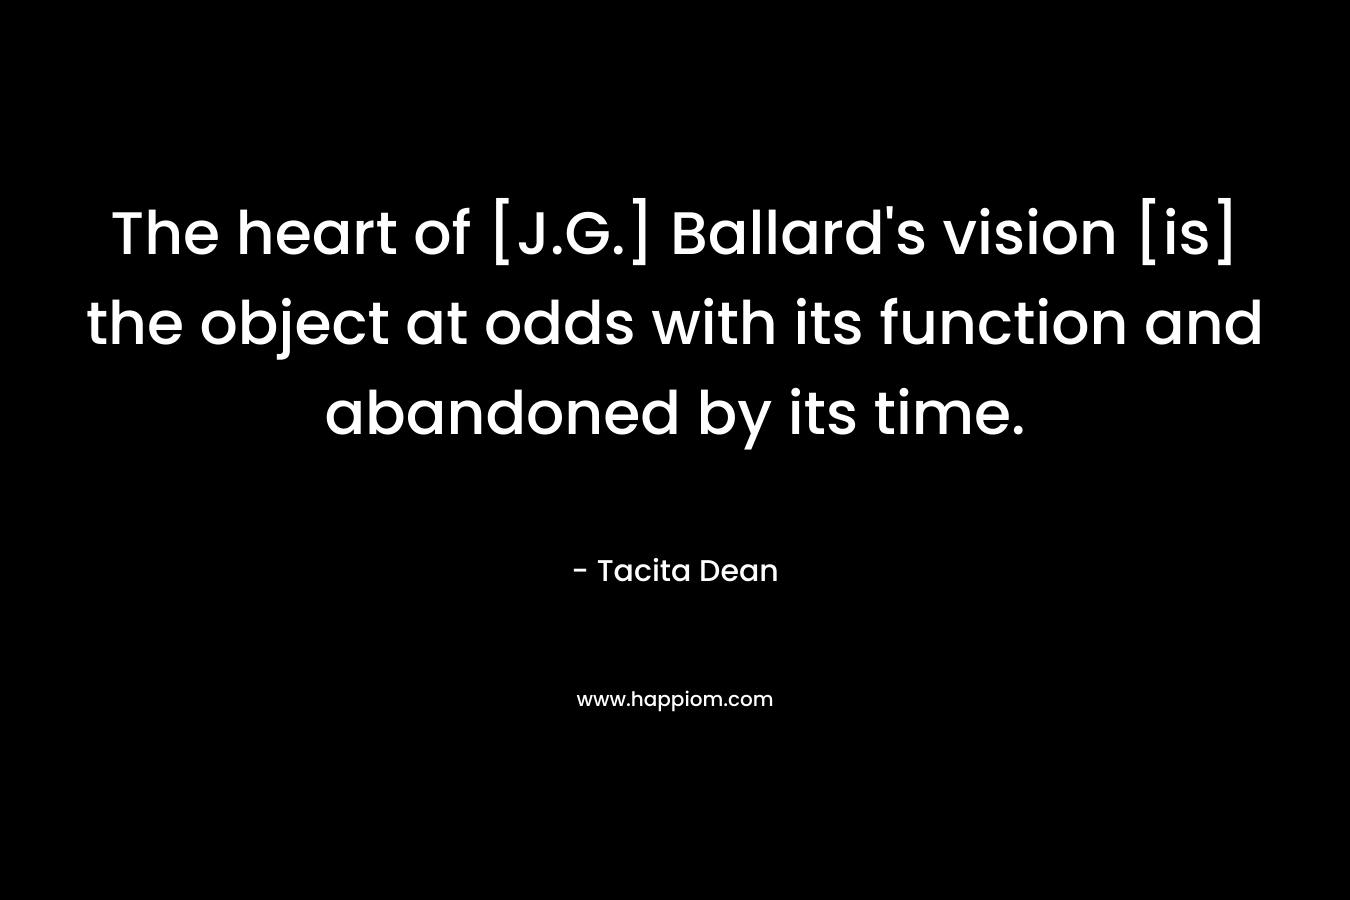 The heart of [J.G.] Ballard's vision [is] the object at odds with its function and abandoned by its time.